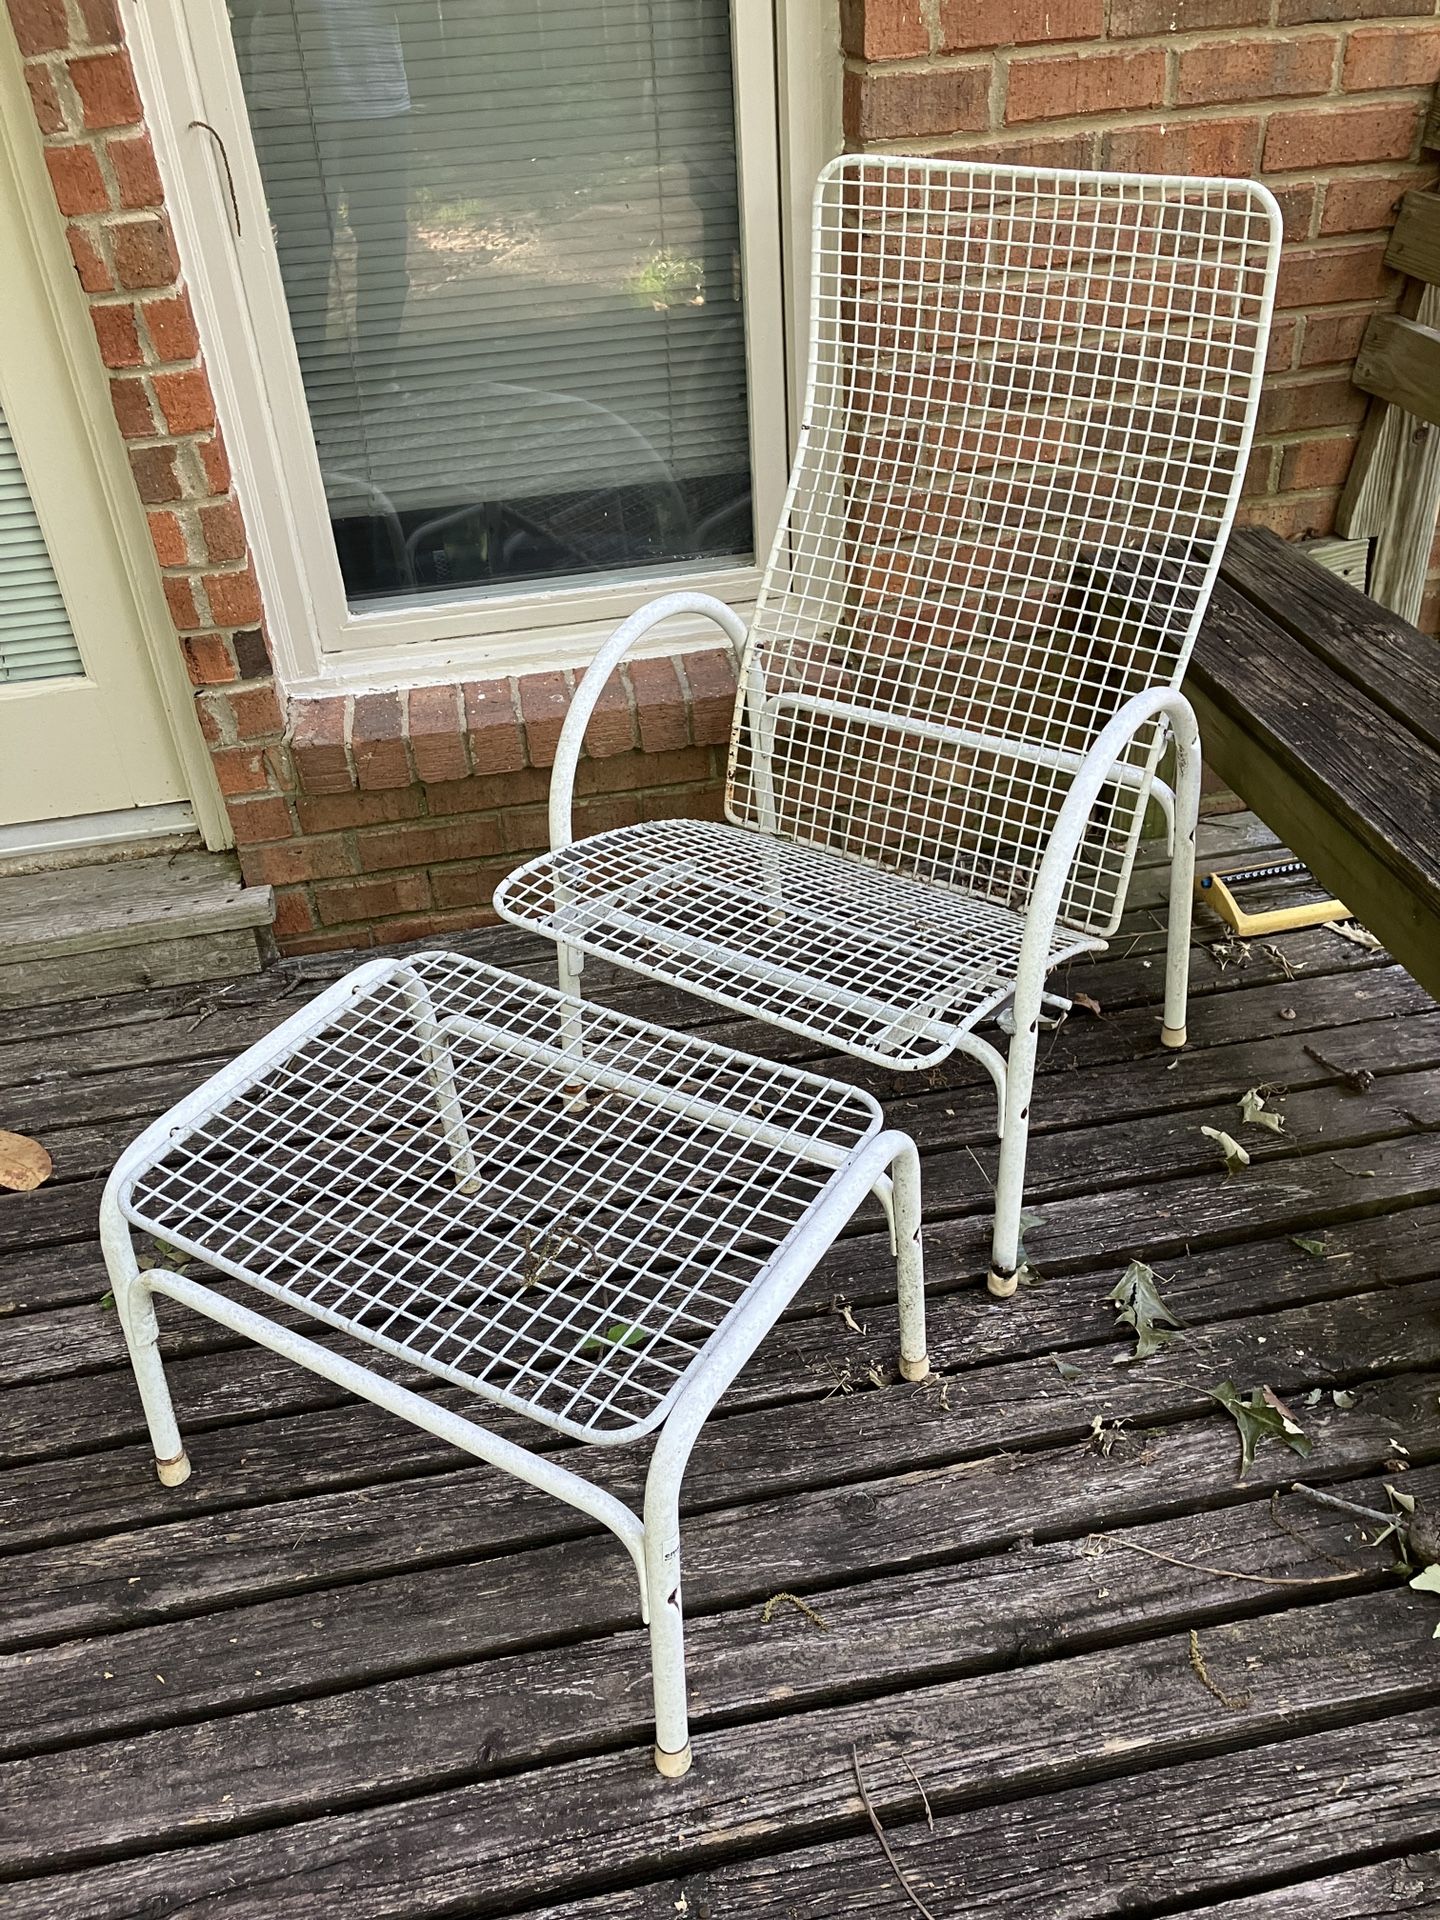 Pair Of Outdoor Adjustable Lounge Chairs